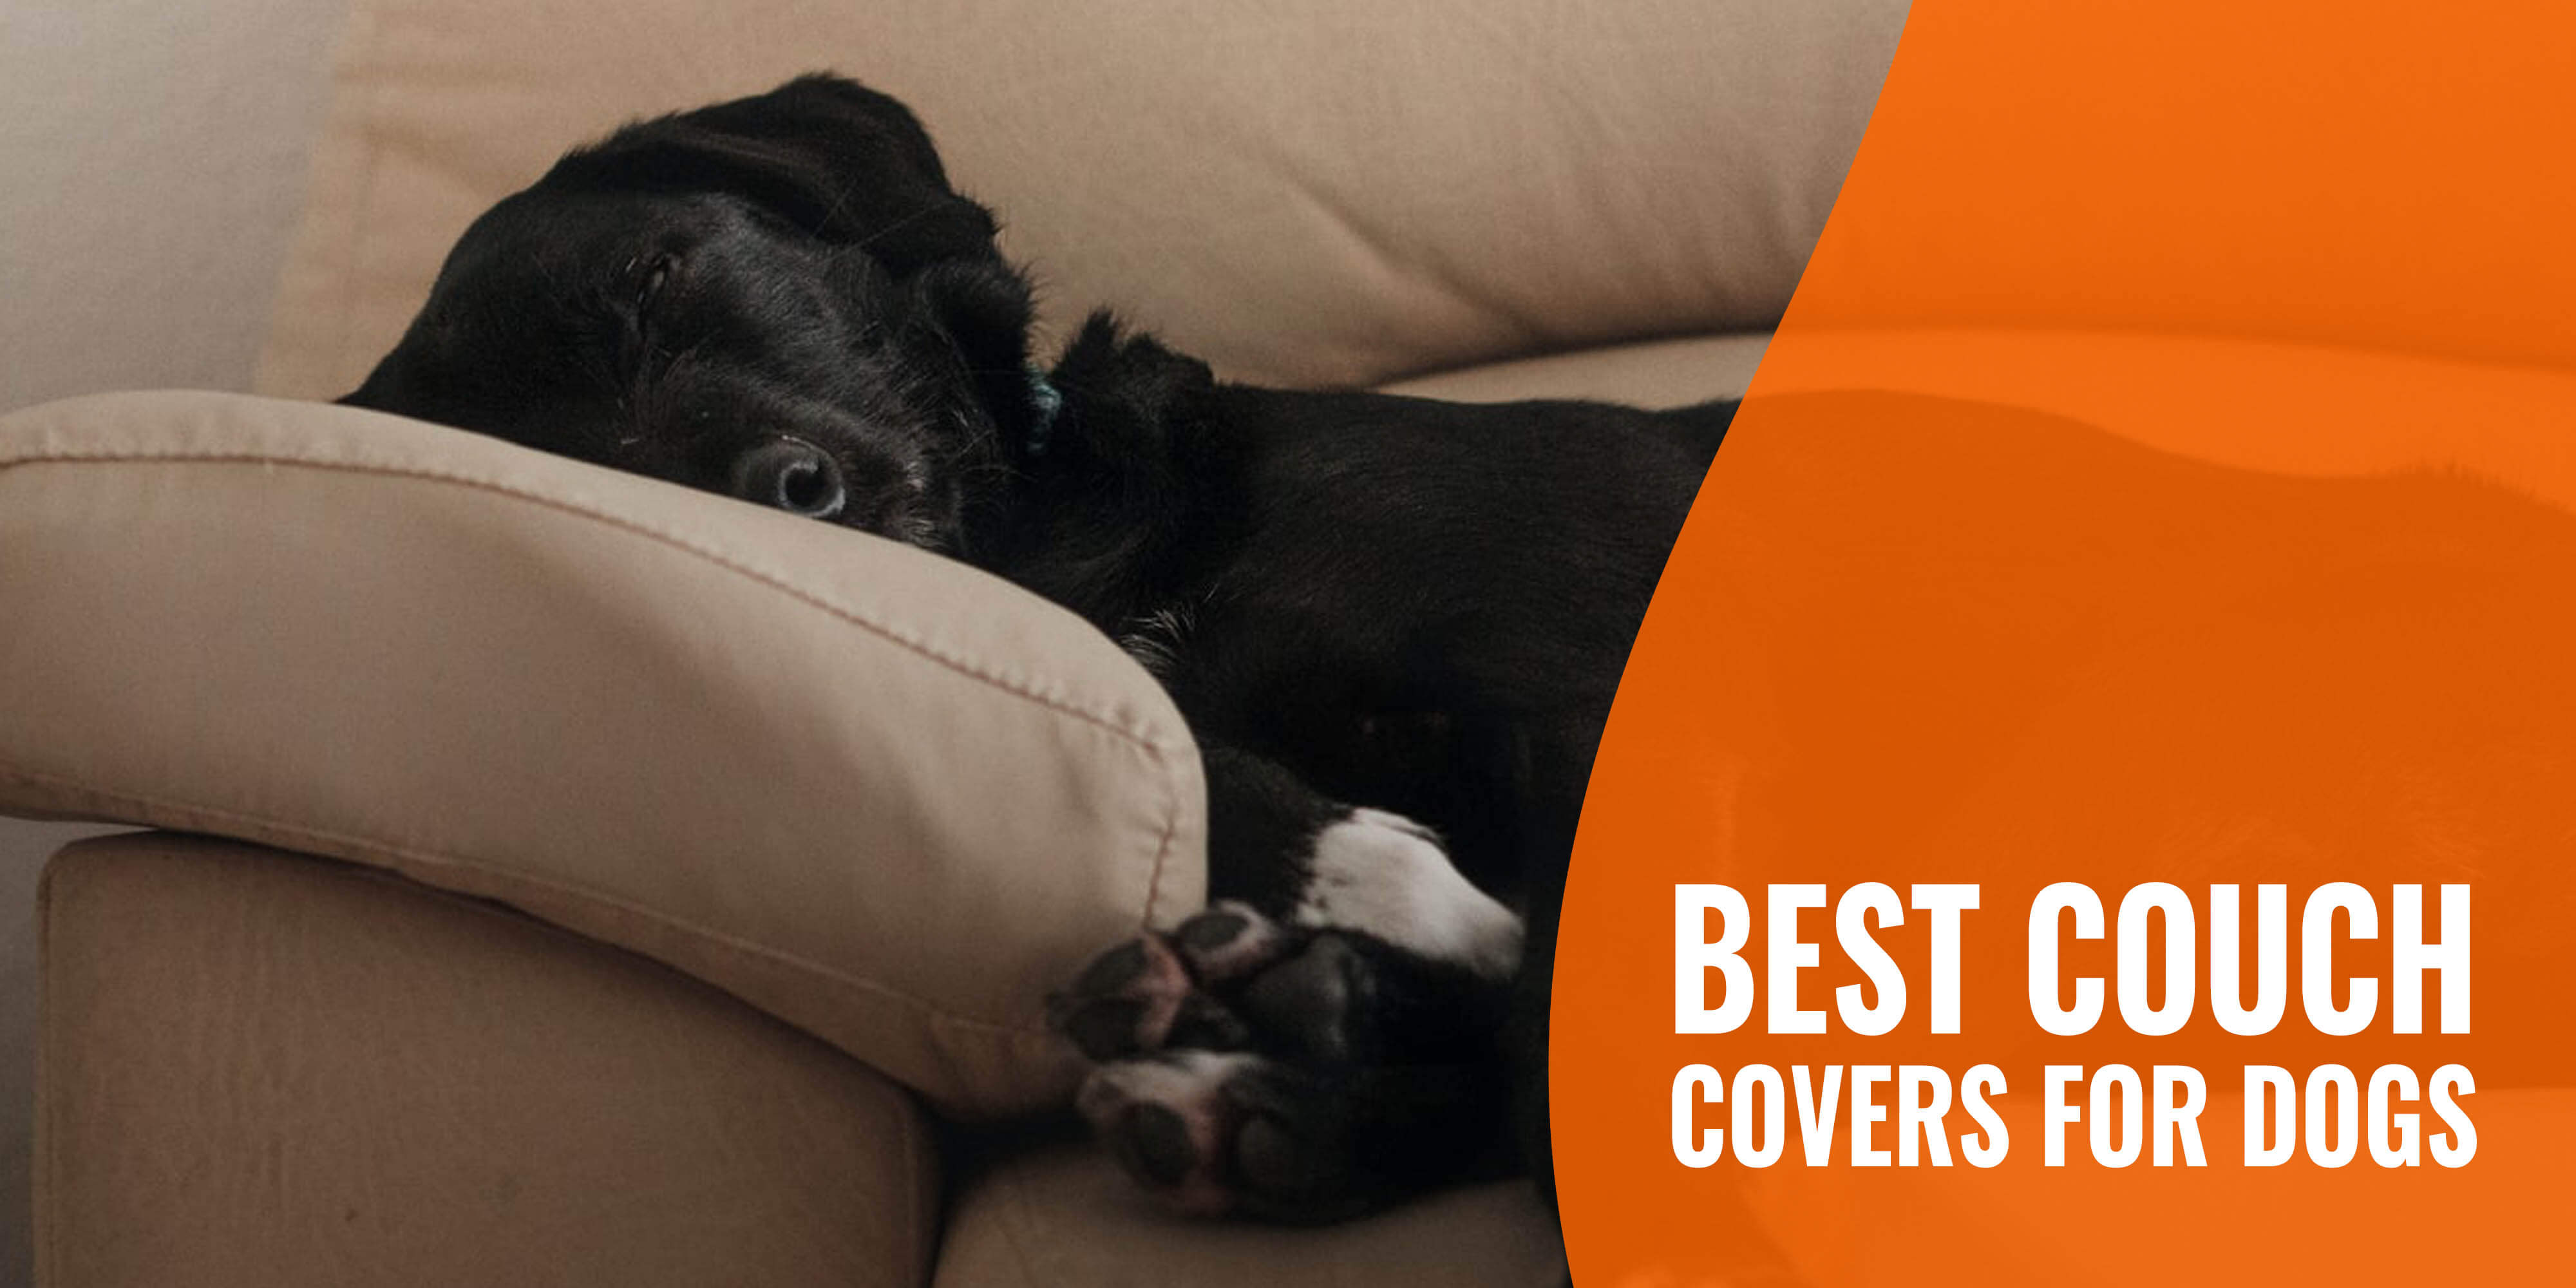 10 Best Couch Covers For Dogs Reviews, Leather Couch Covers For Pets